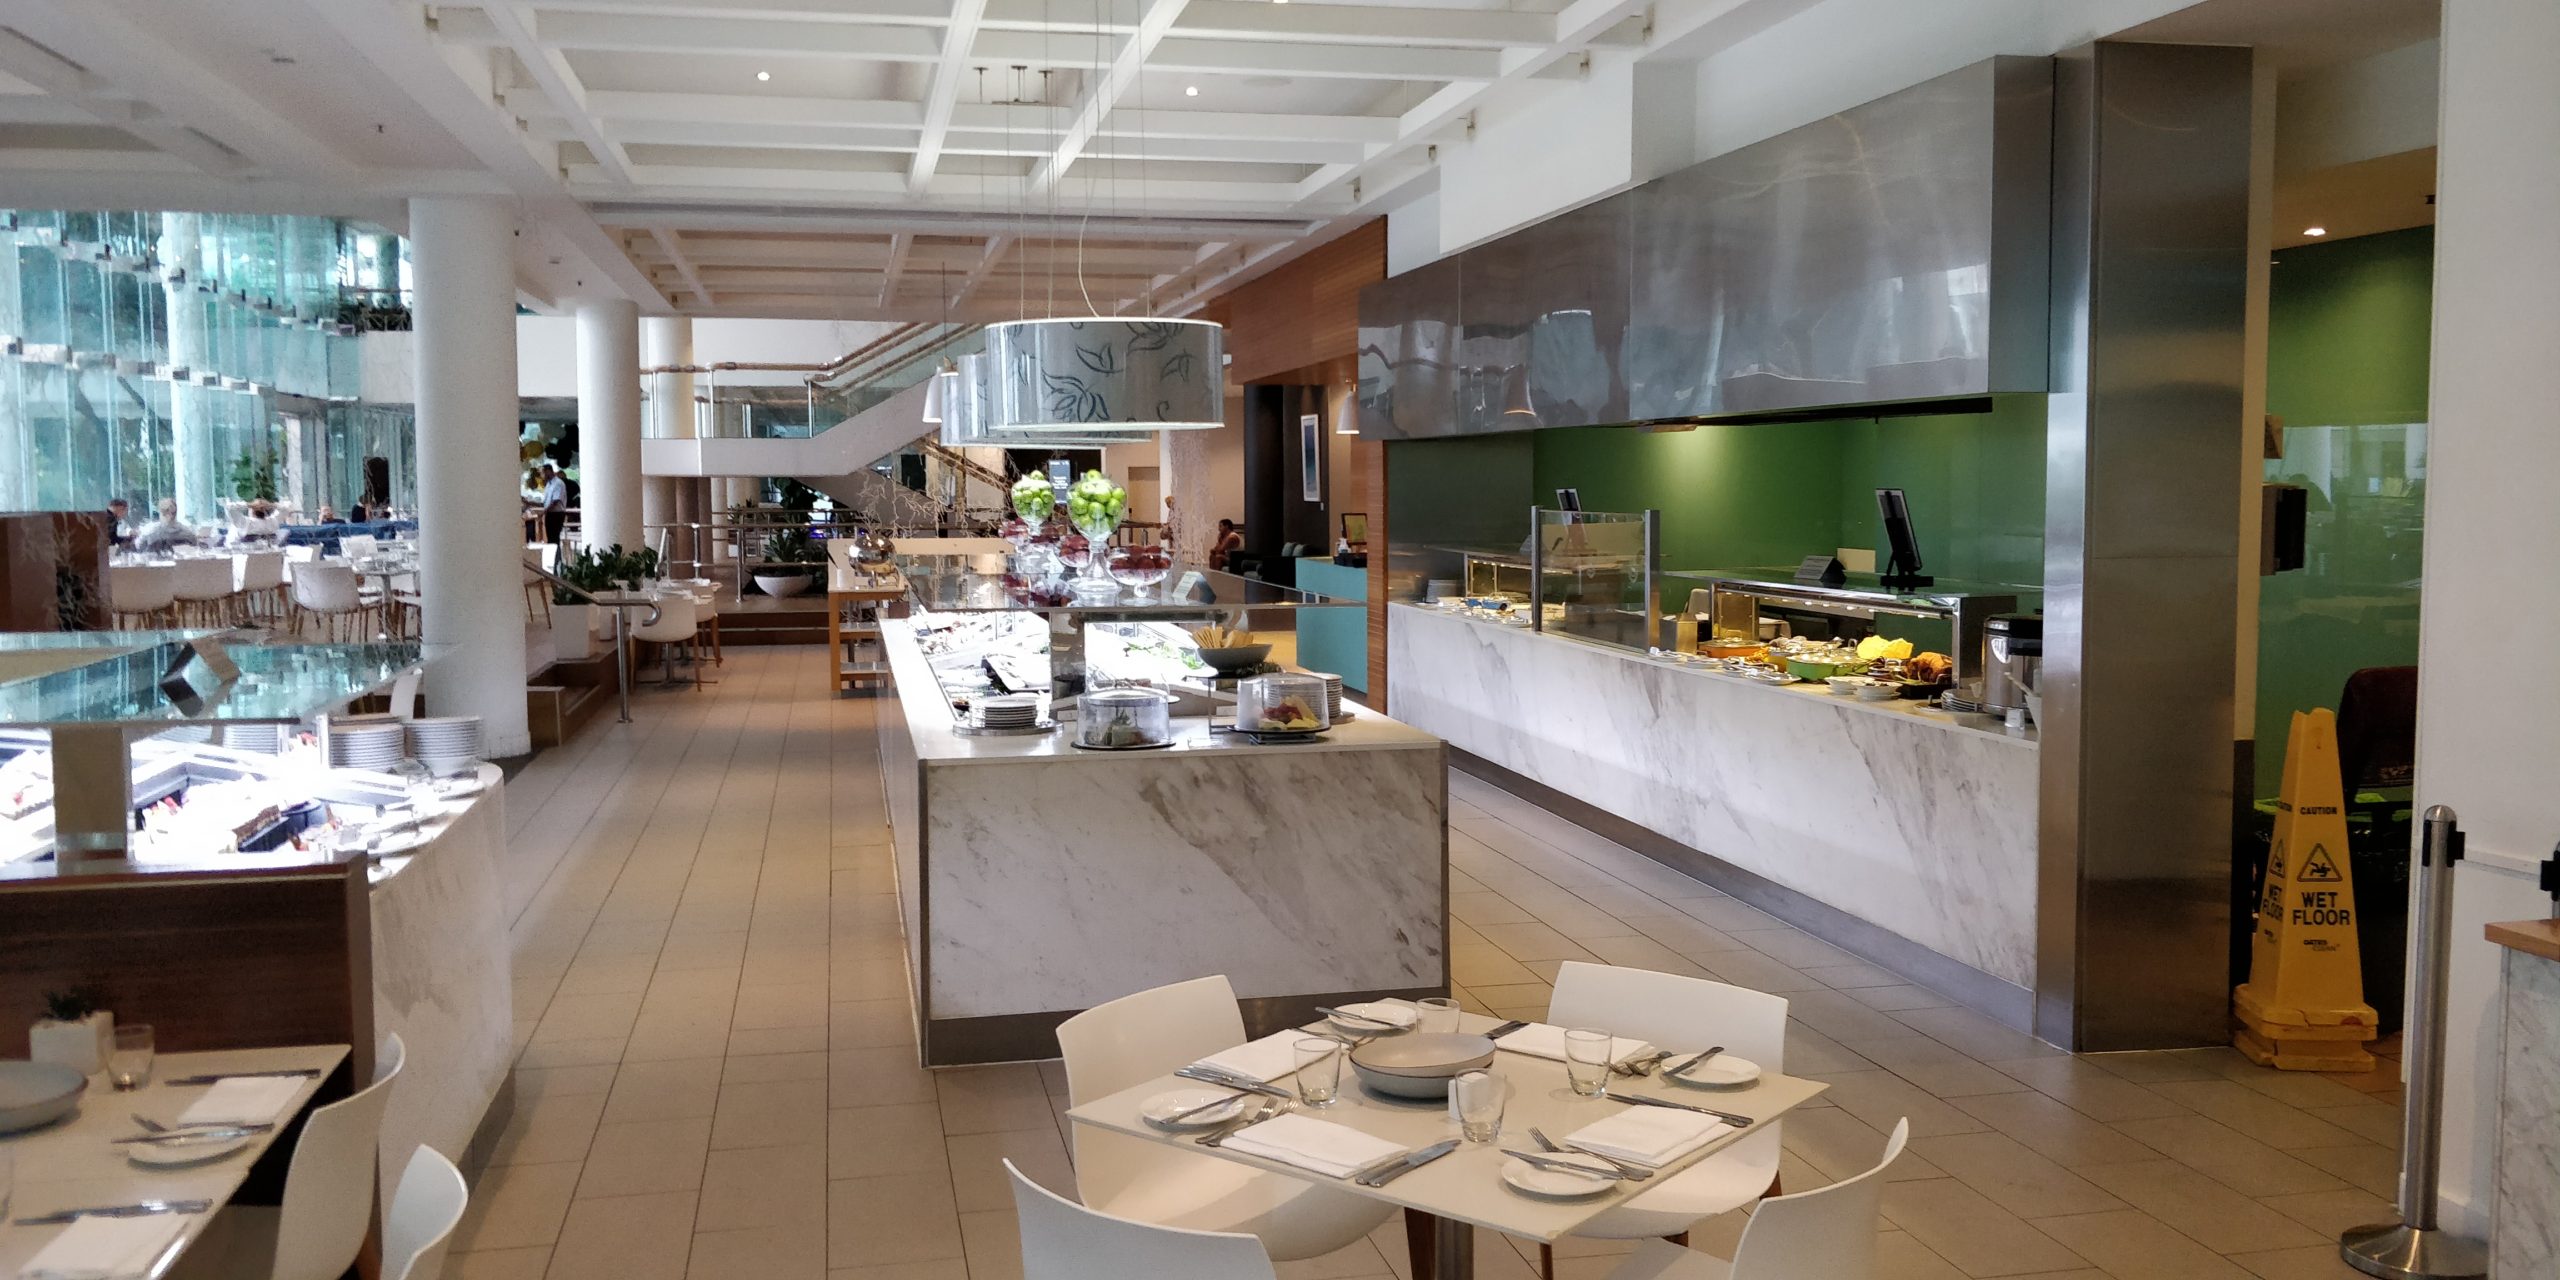 Review the Grand Mirage Resort picture of the buffet islands and and hot counter